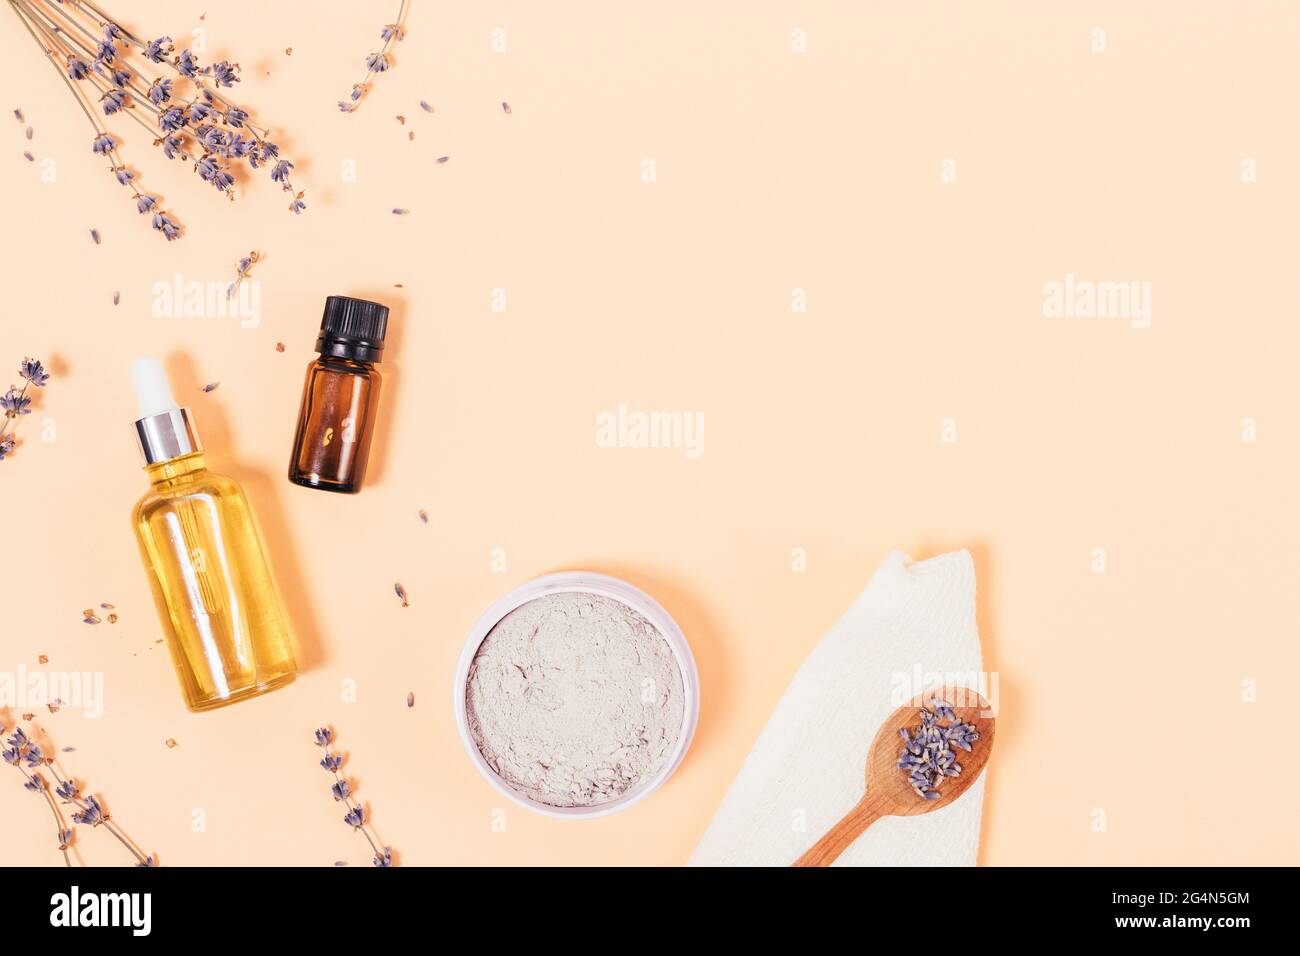 Flat lay composition with lavender flowers, cosmetic clay and aroma oil ingredients for home beauty treatments, beige background with copy space. Stock Photo